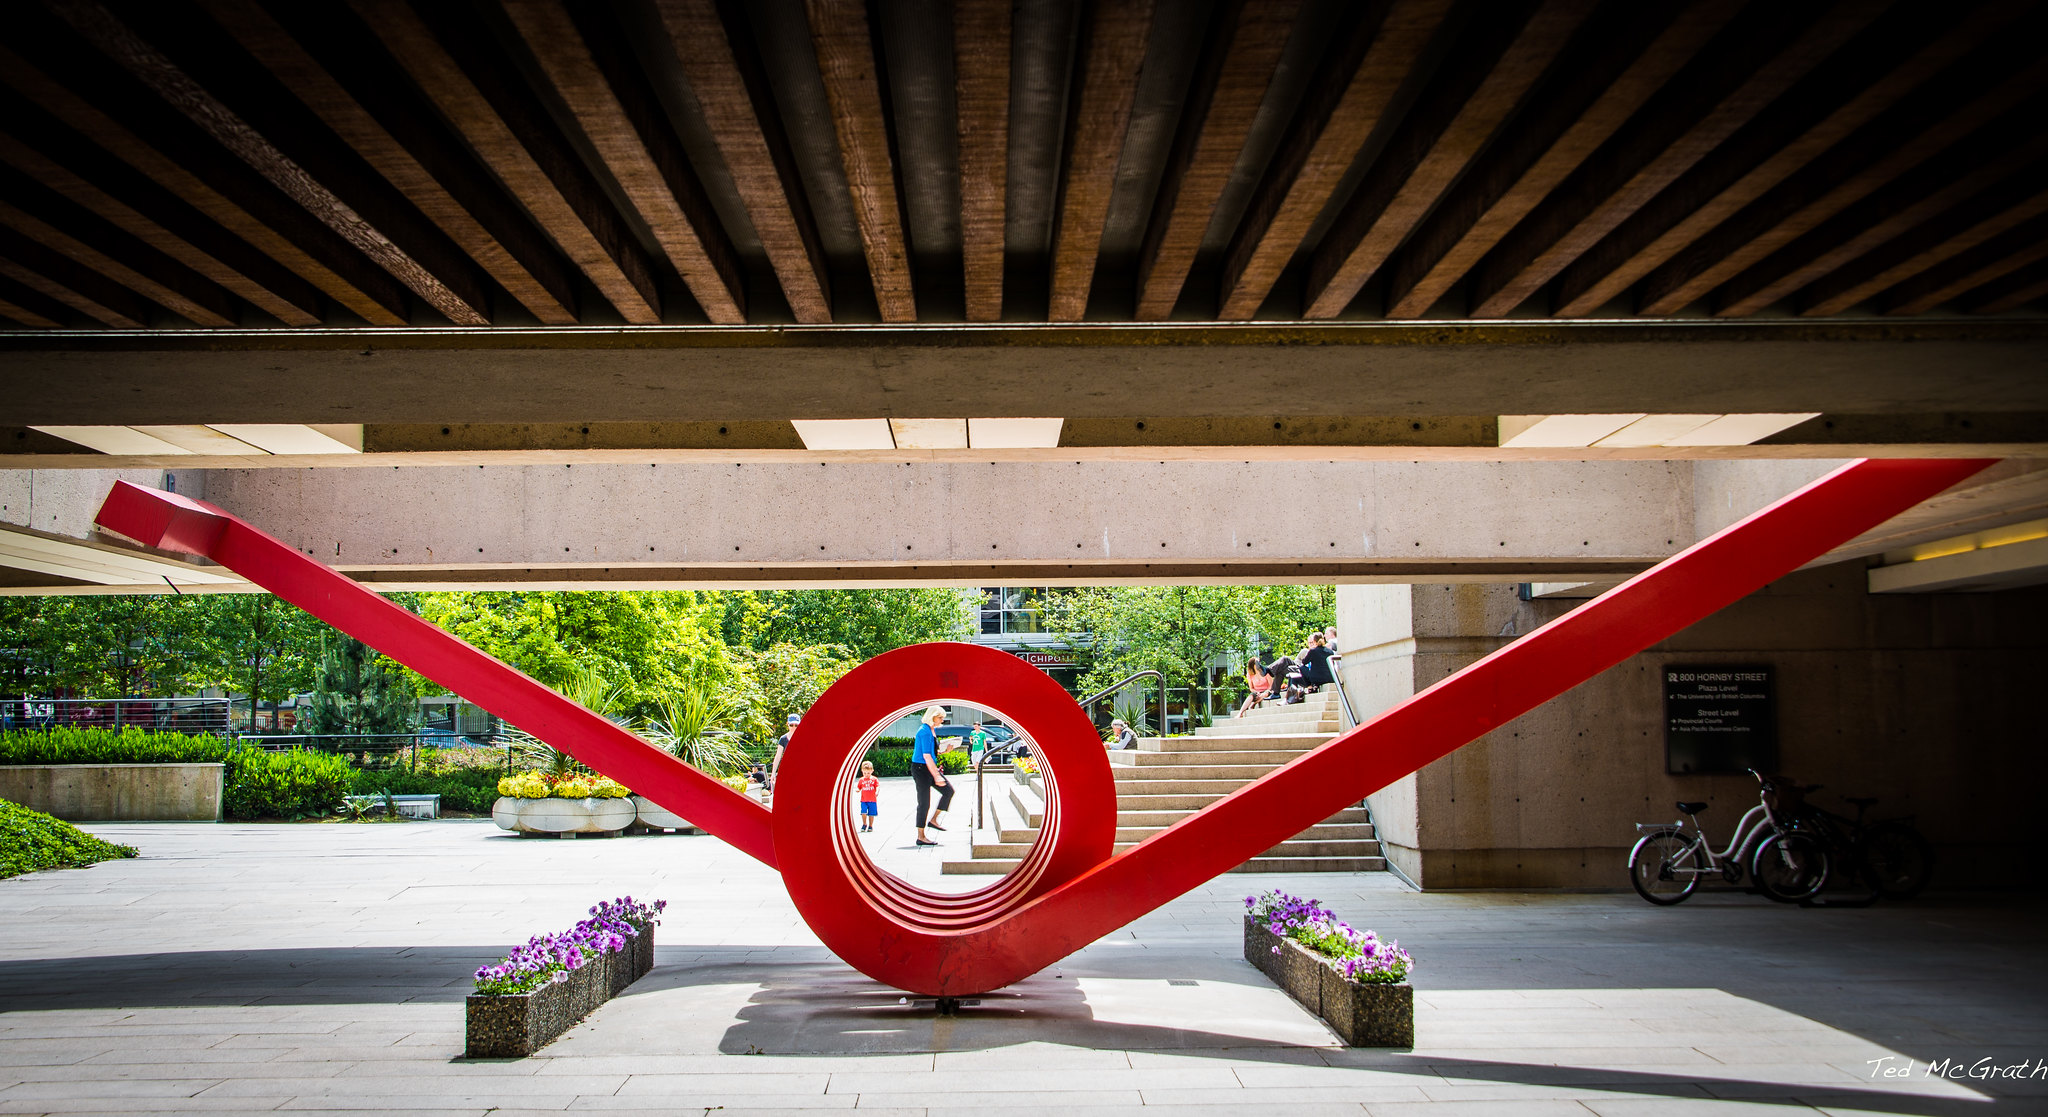 A red metal sculpture with a spring-like tunnel and two arms sticking out at wide angles.